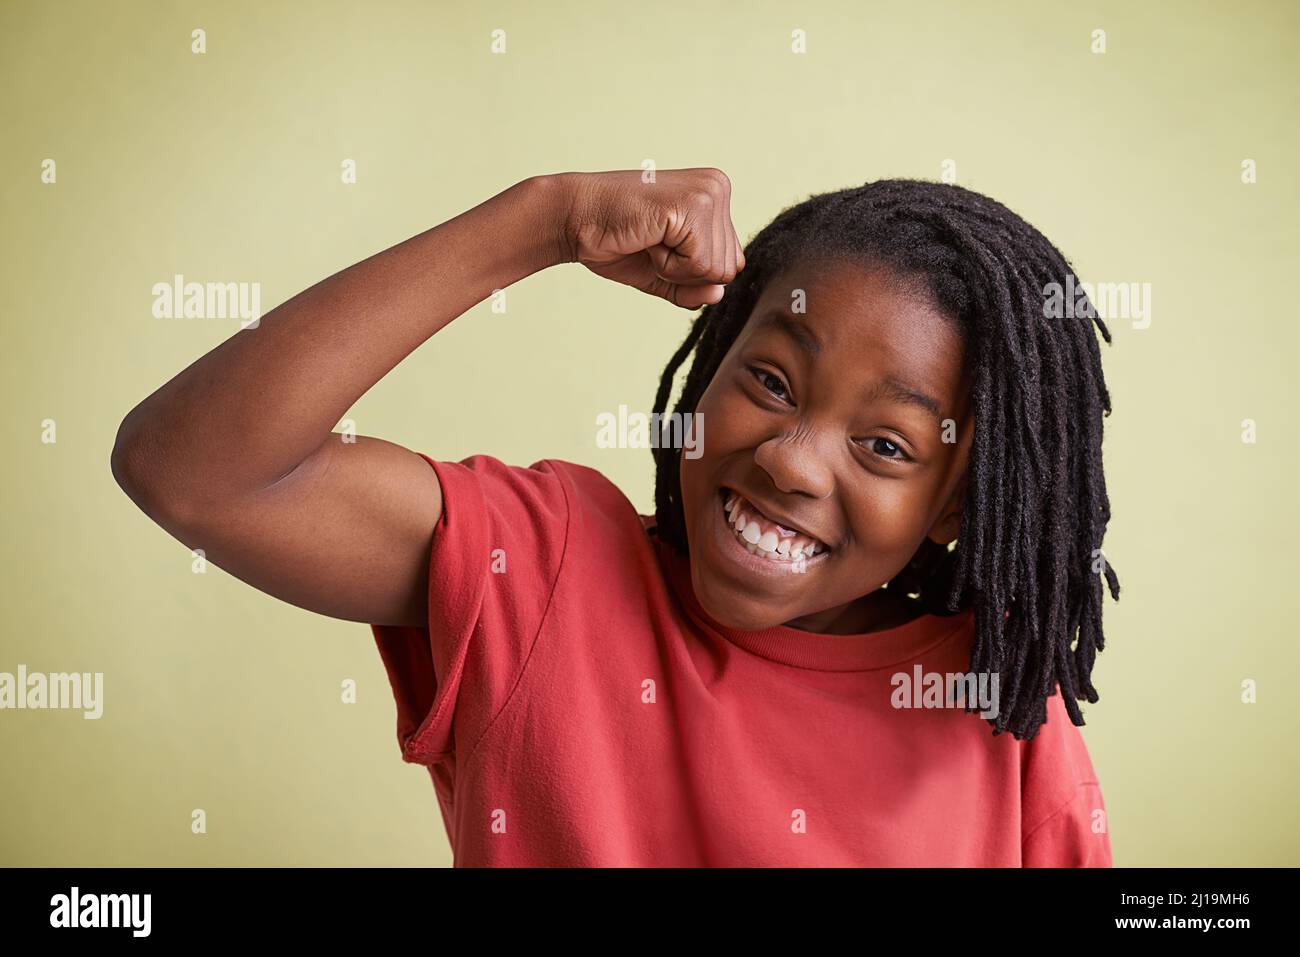 Check these muscles out. Studio portrait of a young boy showing off his muscles. Stock Photo